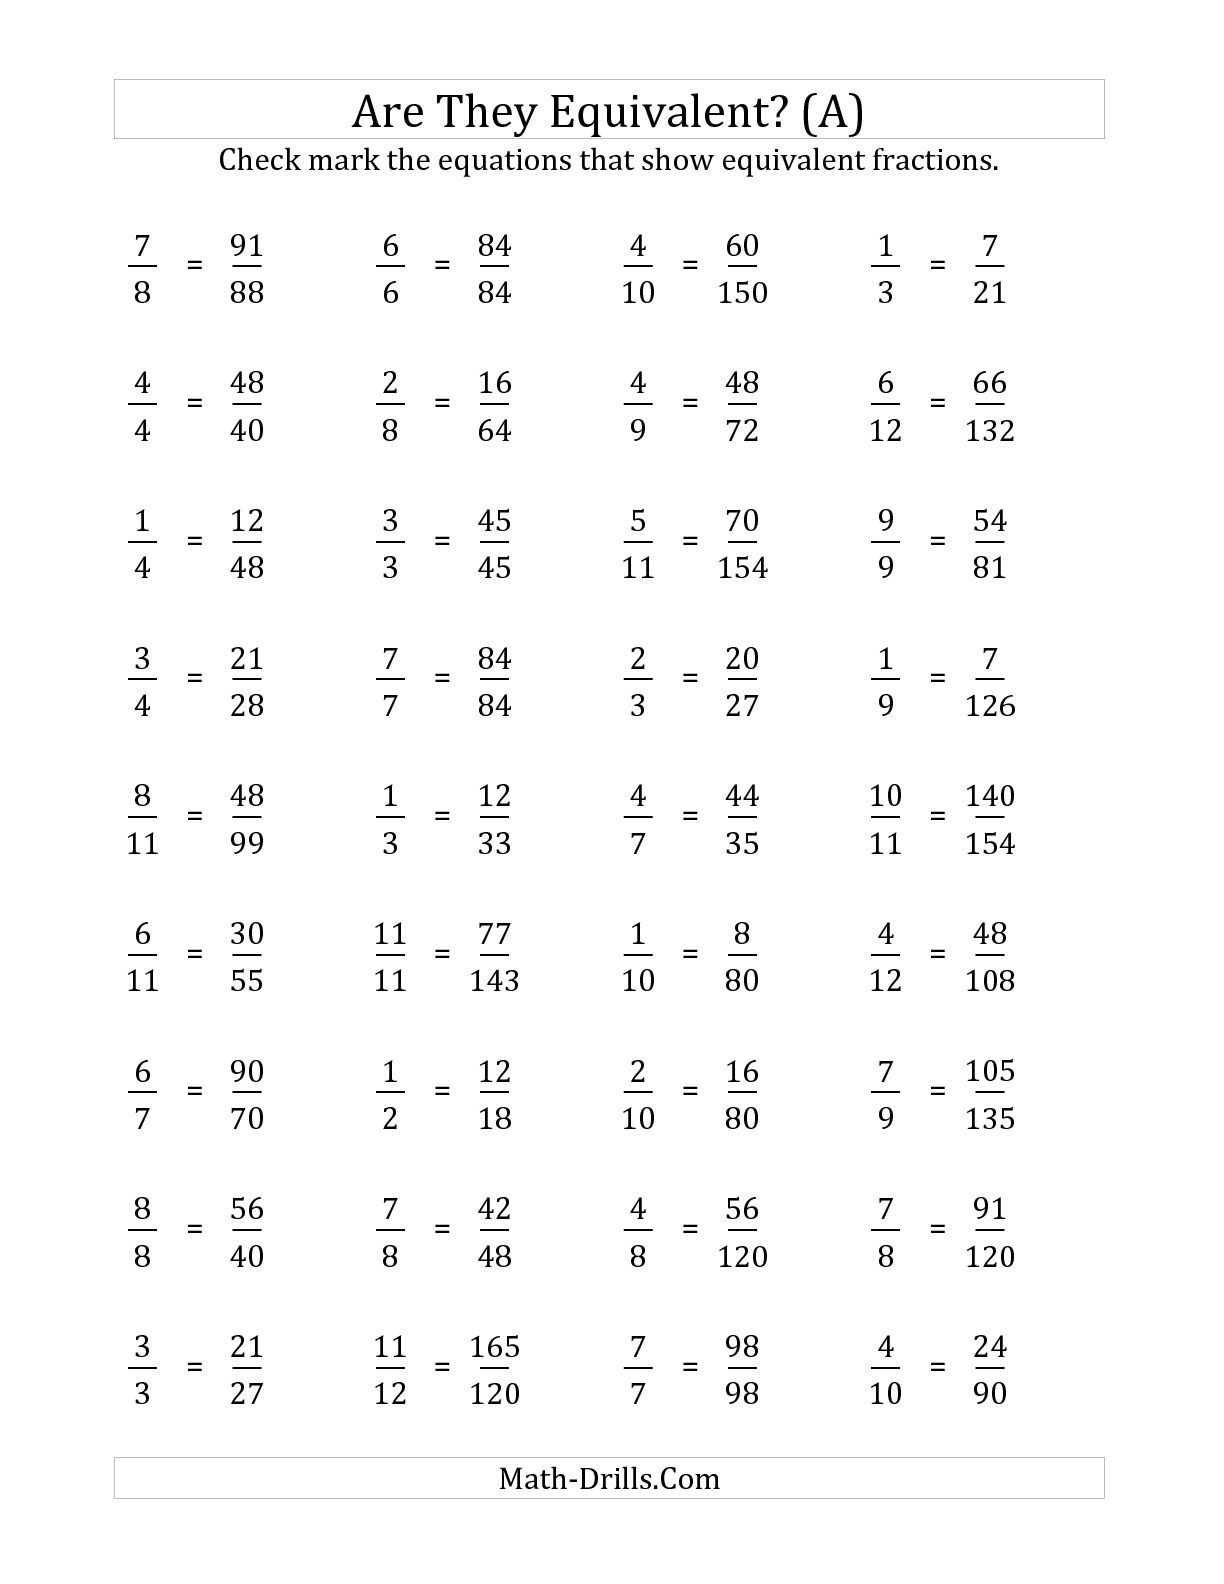 Reducing Fractions to Lowest Terms Worksheets Also 6th Grade Math Worksheets Simplifying Fractions Fresh Reducing